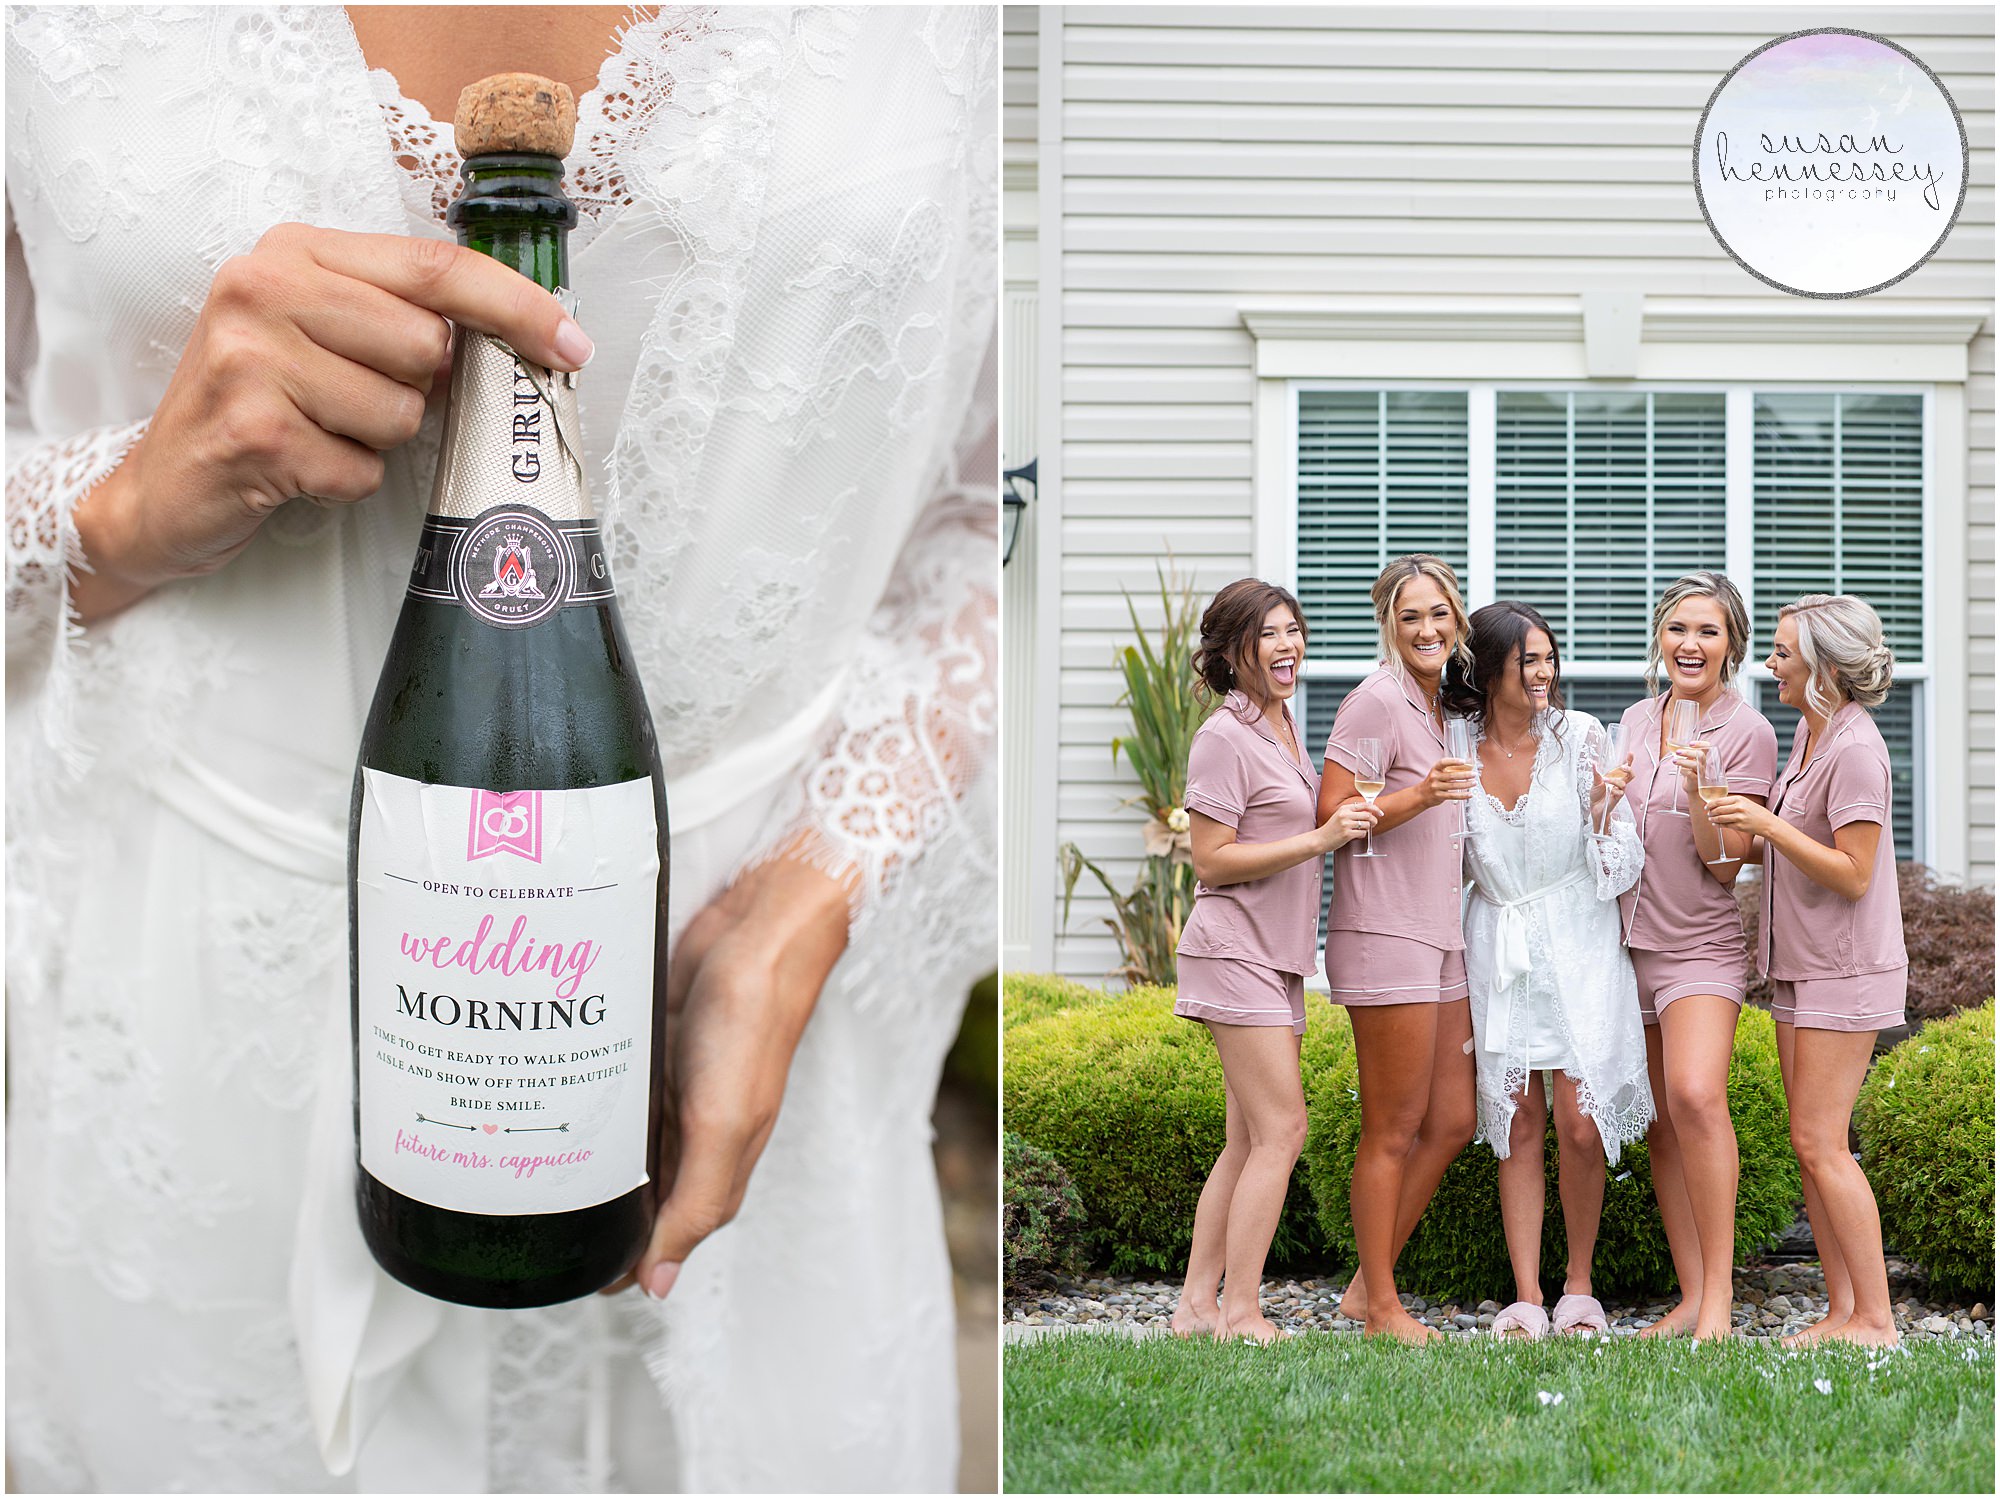 Bride and bridesmaids with champagne at Fall winery wedding.